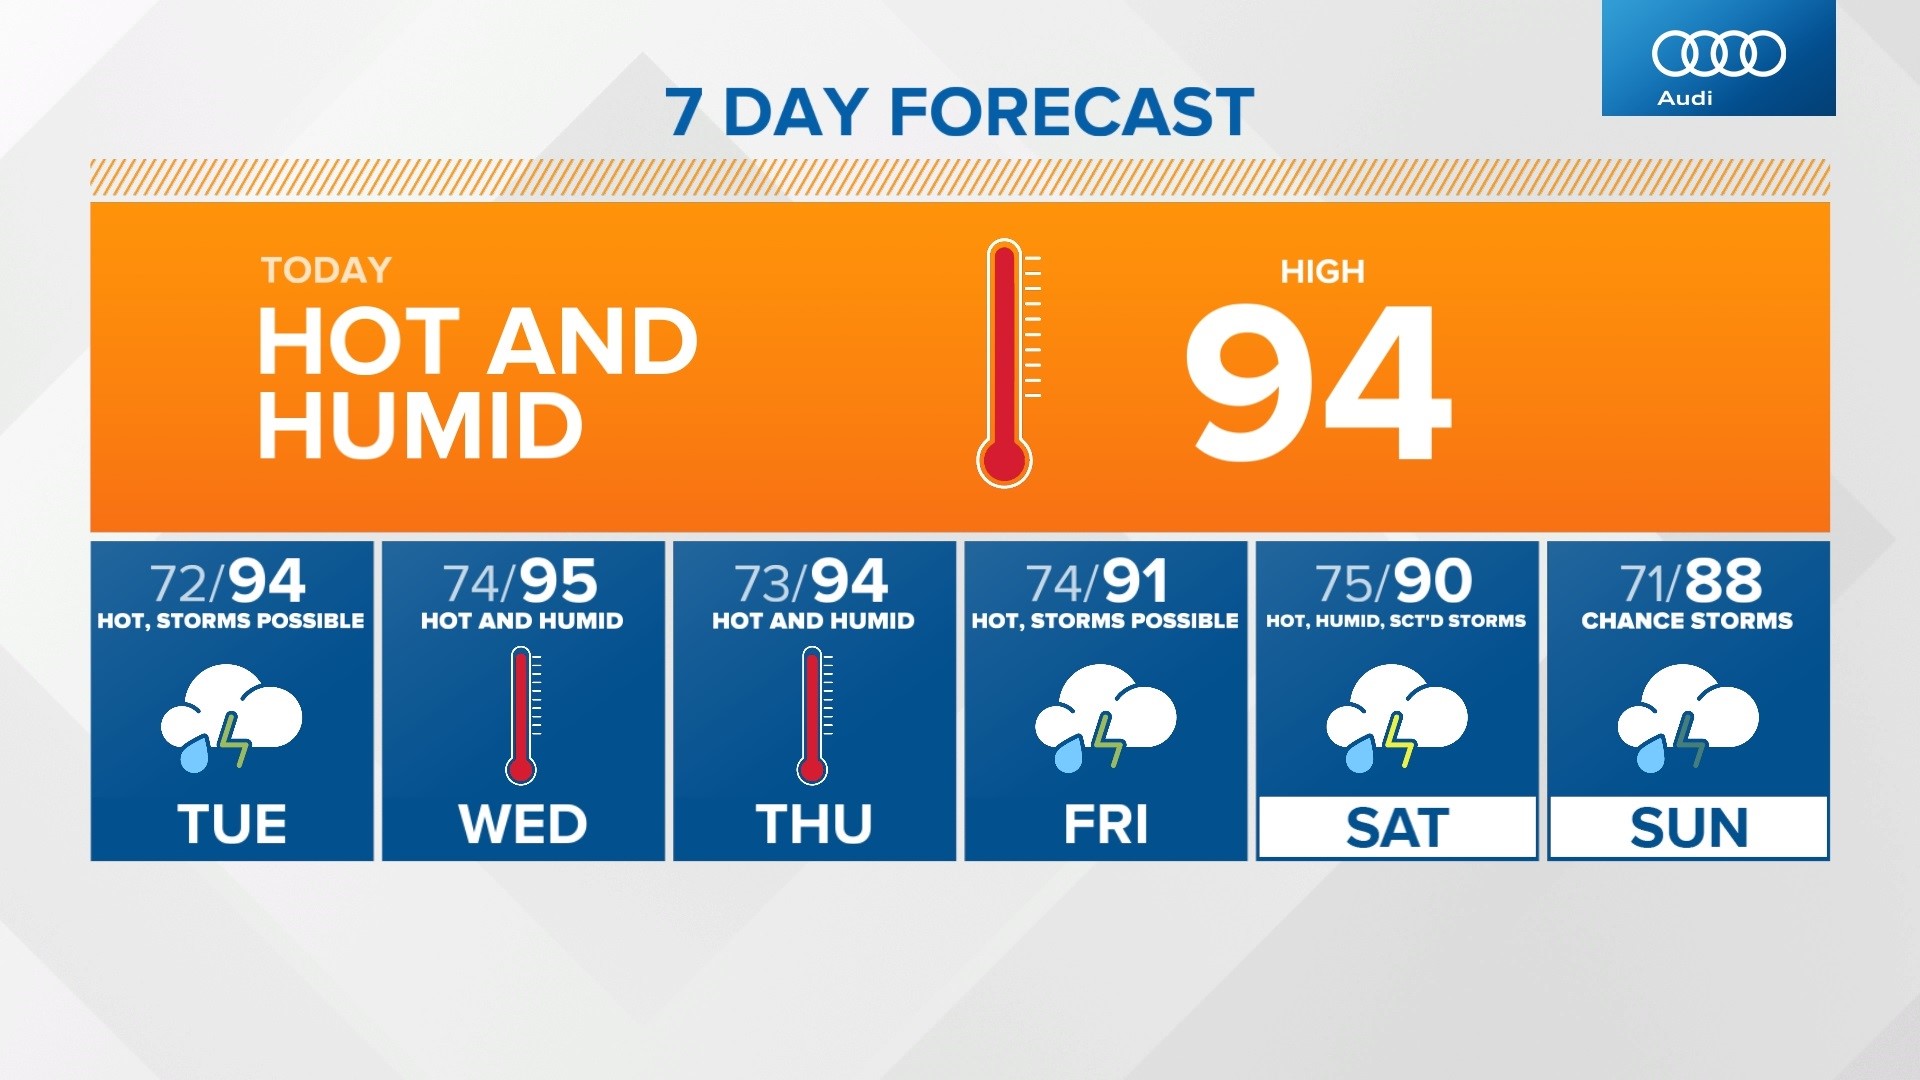 Look for 90-degree weather through Saturday with high humidity with us all week long.